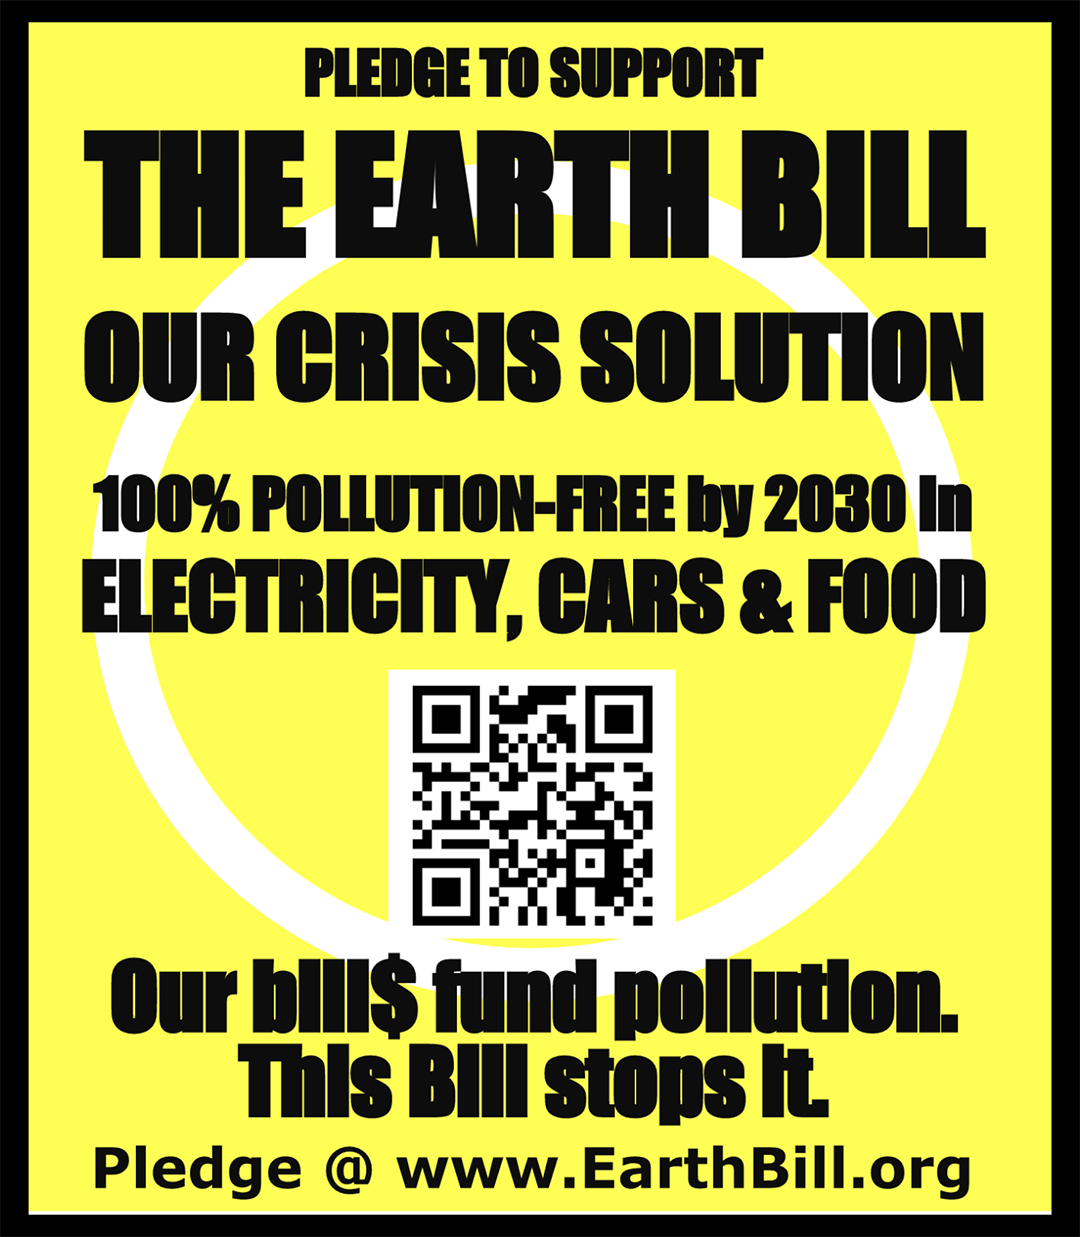 Pledge to support the Earth Bill. Our Crisis Solution. 100% polution-free by 2030 in electricity, cars, and food. Our bills fund pollution. This bill stops it. Pledge at www.eathbill.org